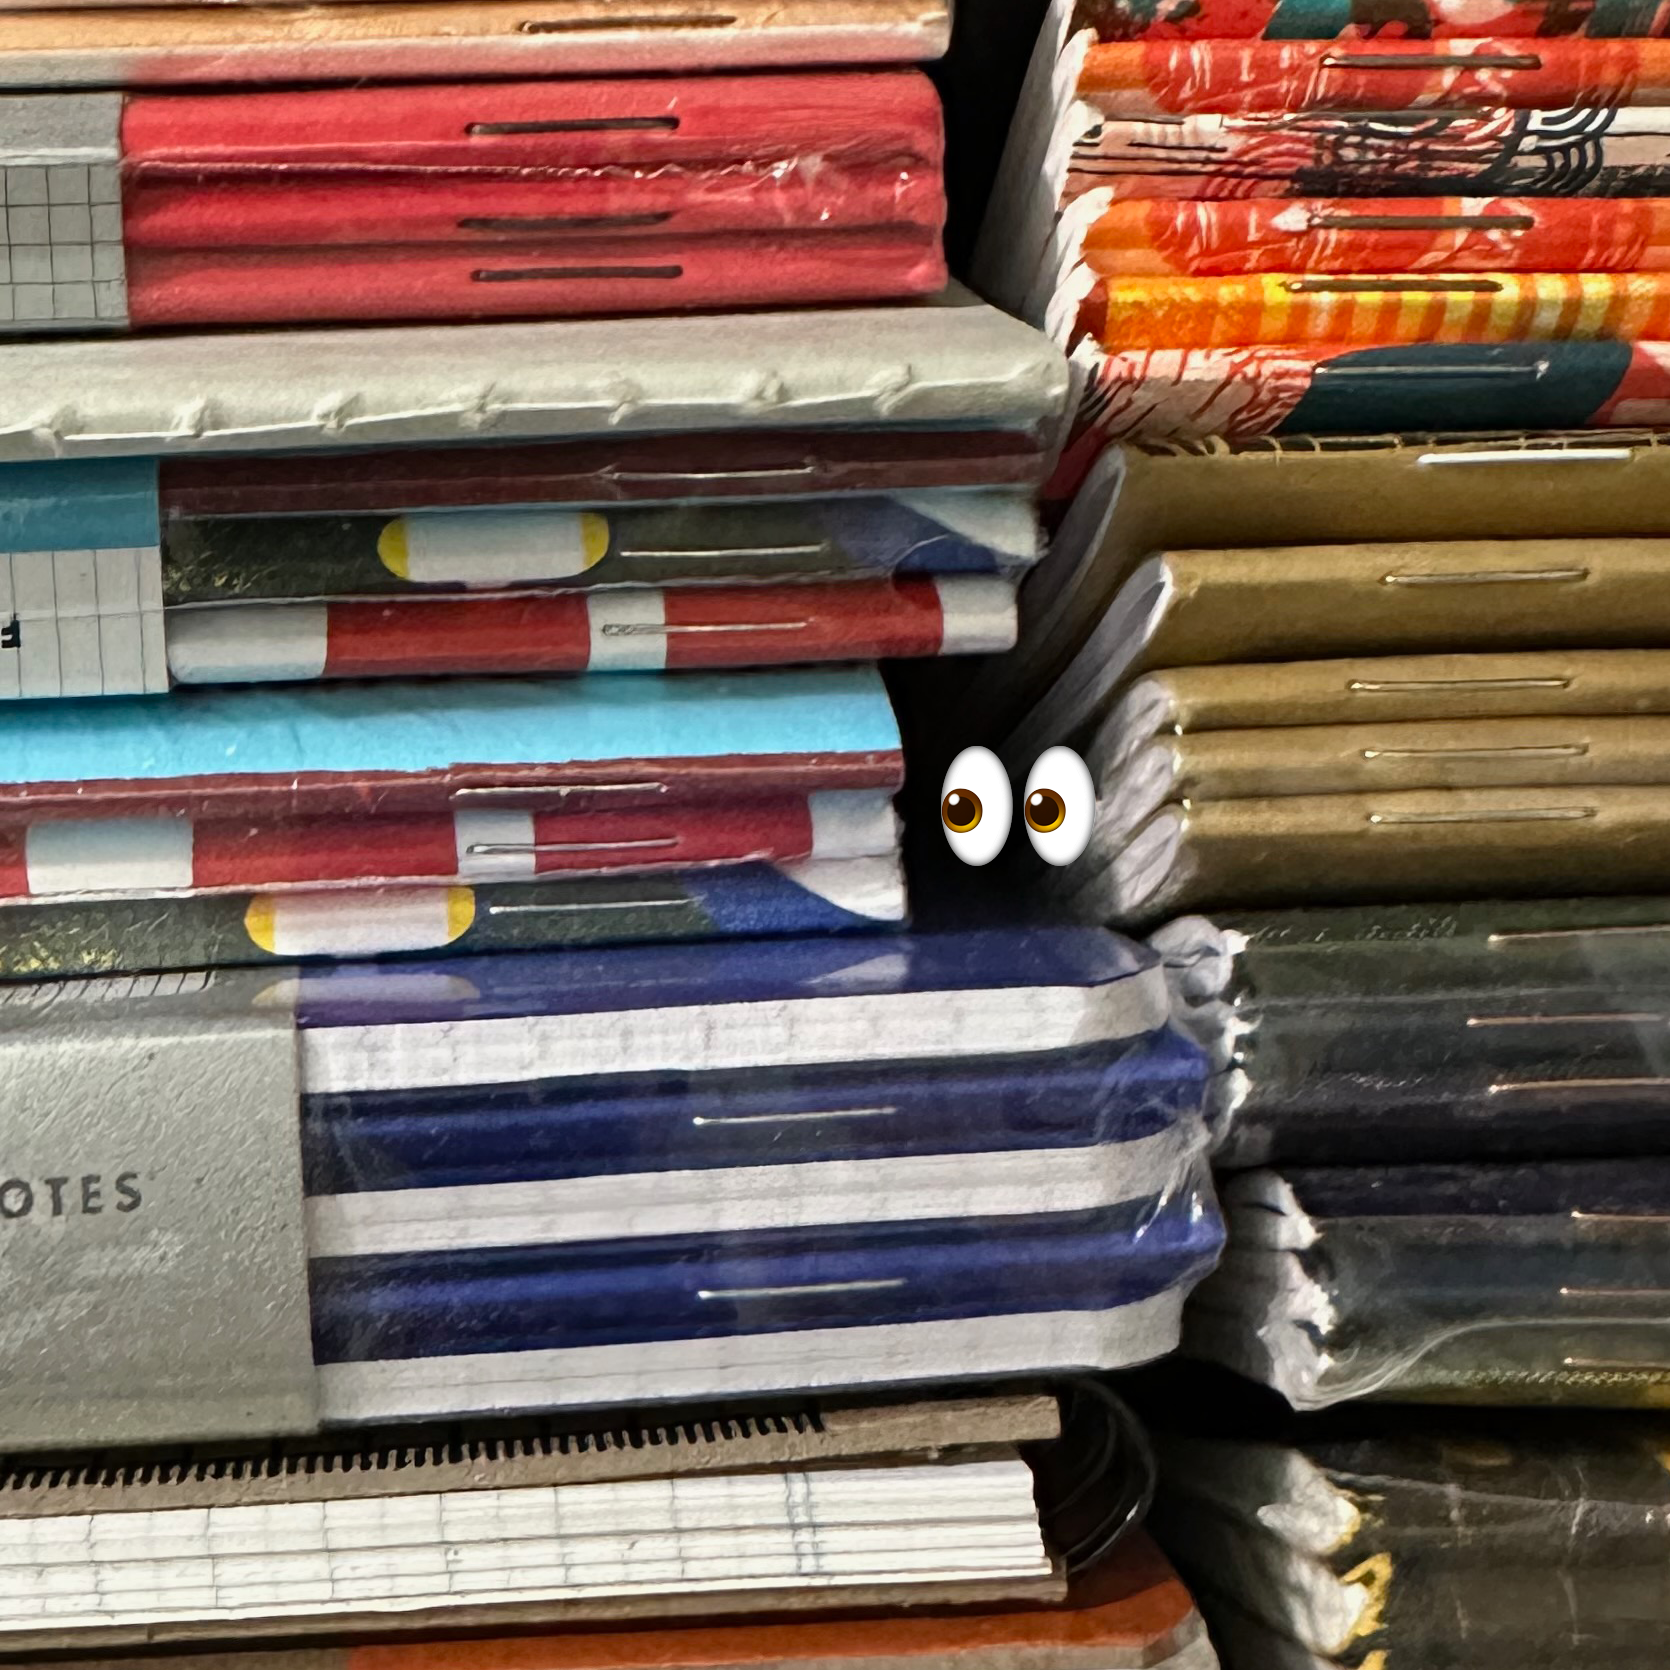 Stacks of Field Notes notebooks with eyeball emoji in center, looking left